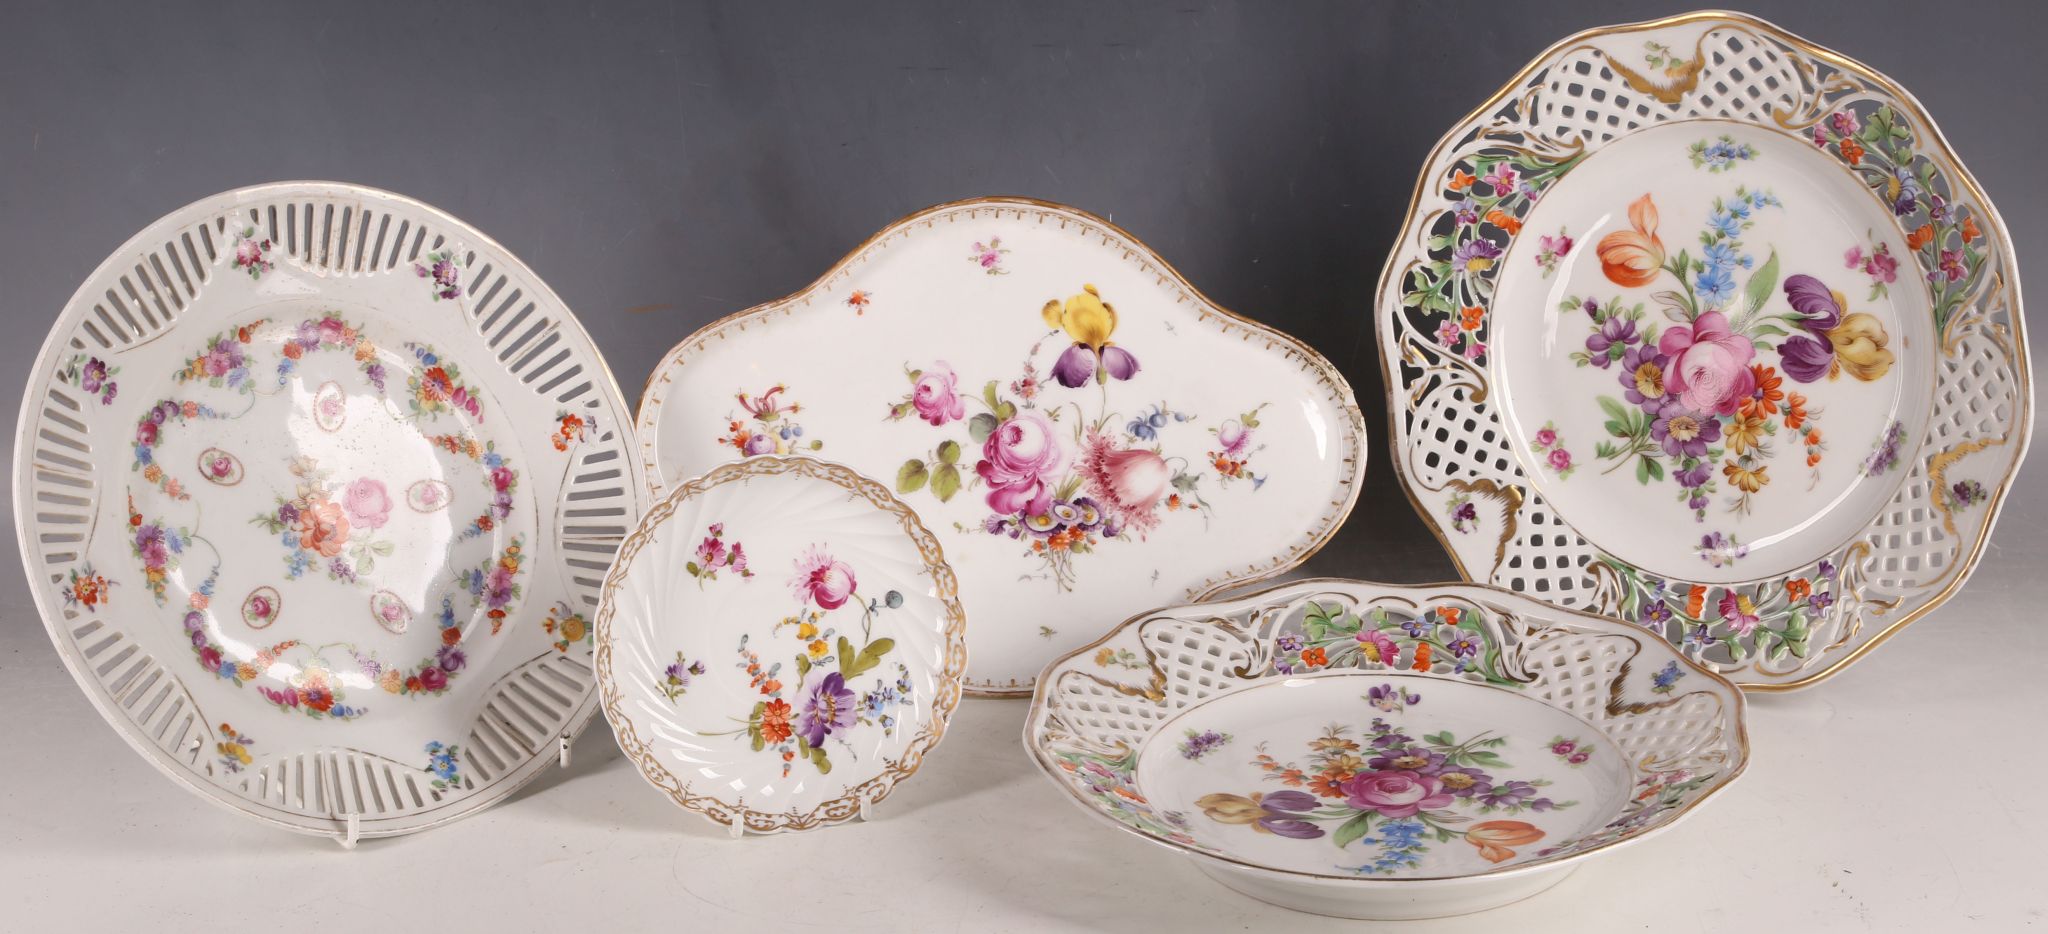 A various selection of late 19th or early 20th Century Dresden porcelain cabinet plates, all painted